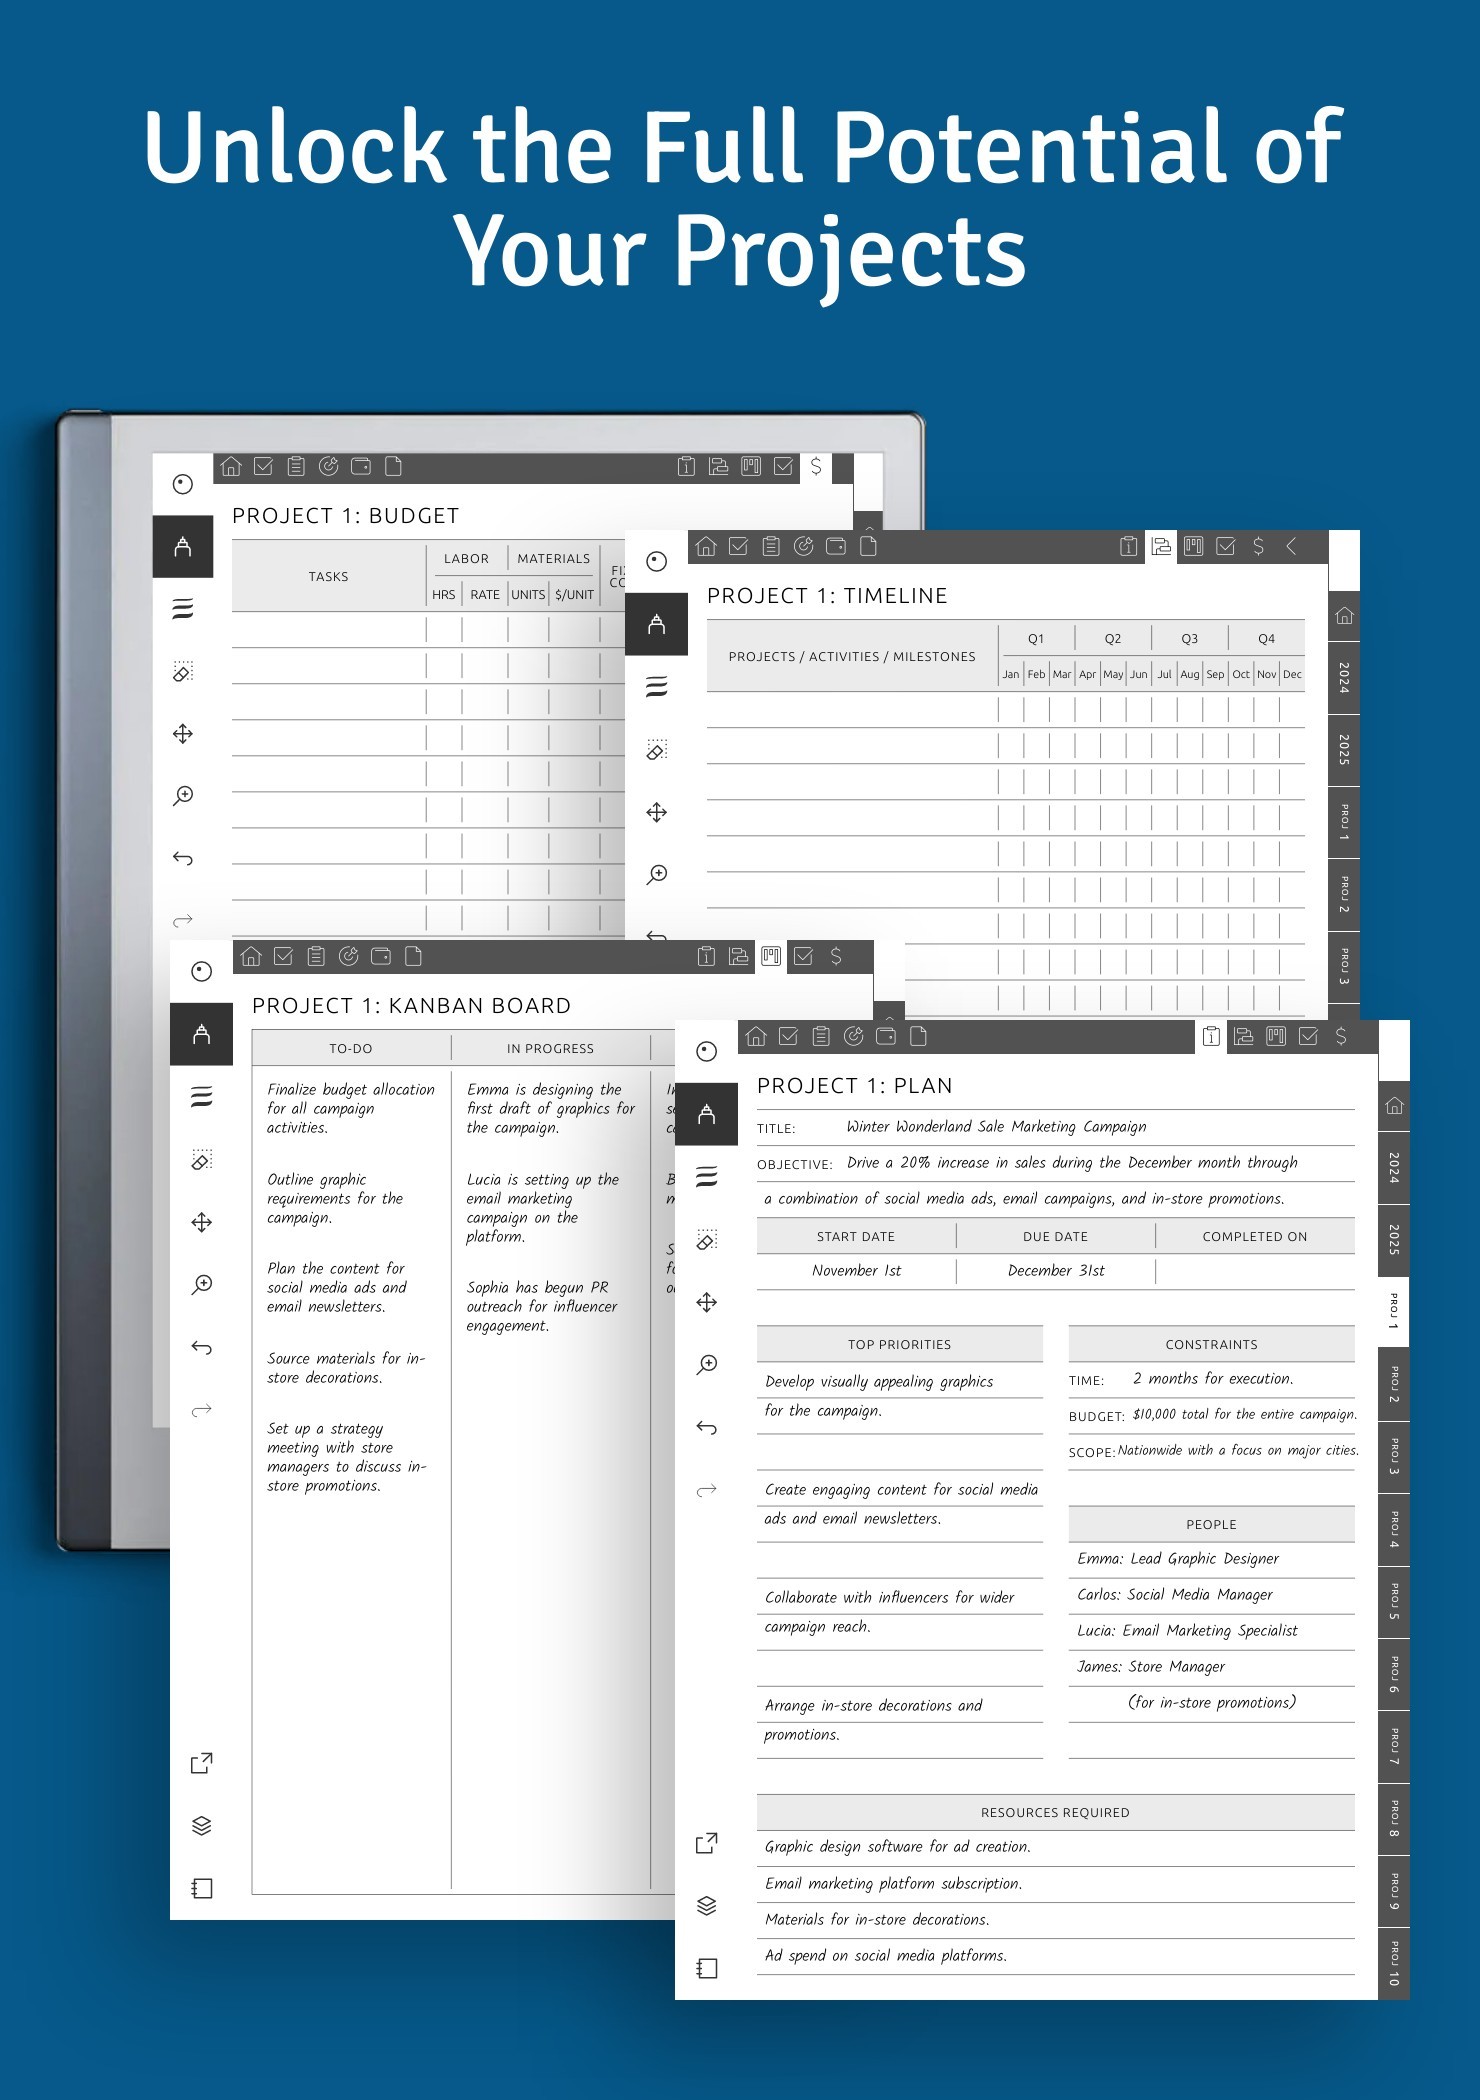 Project templates, plans, budgets, Kanban boards